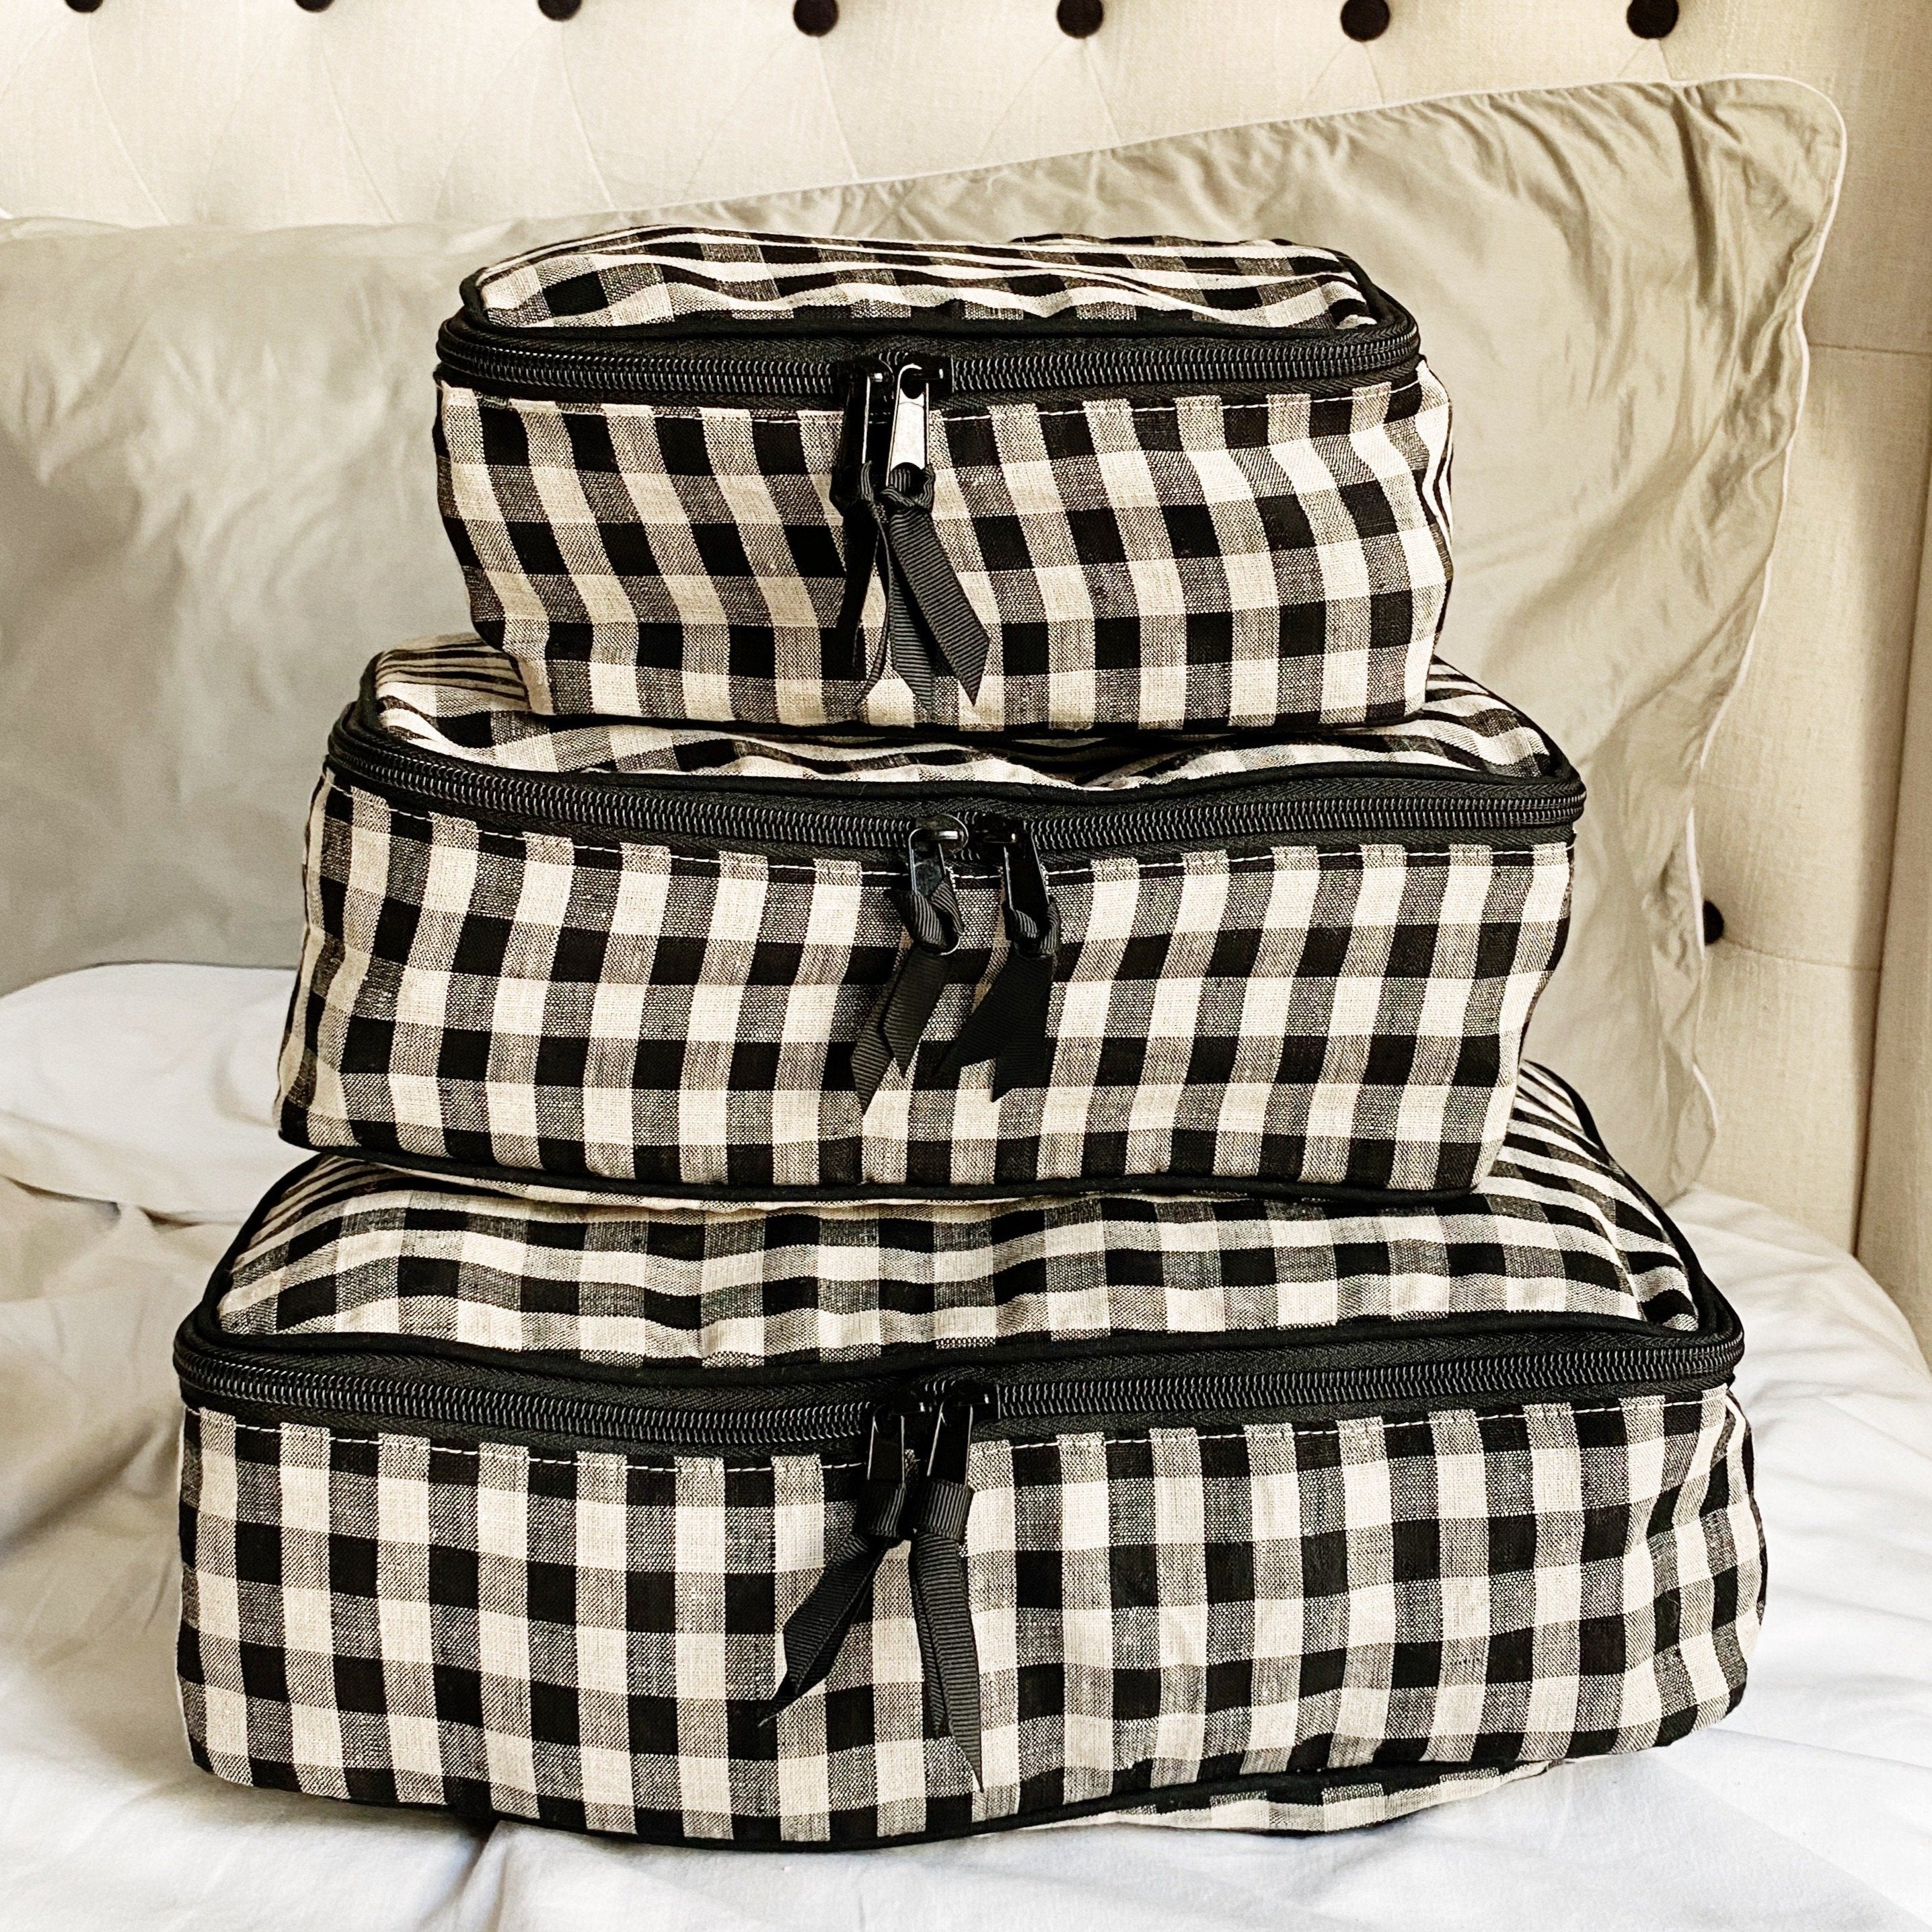 Cotton Packing Cubes Gingham Linen 3-pack